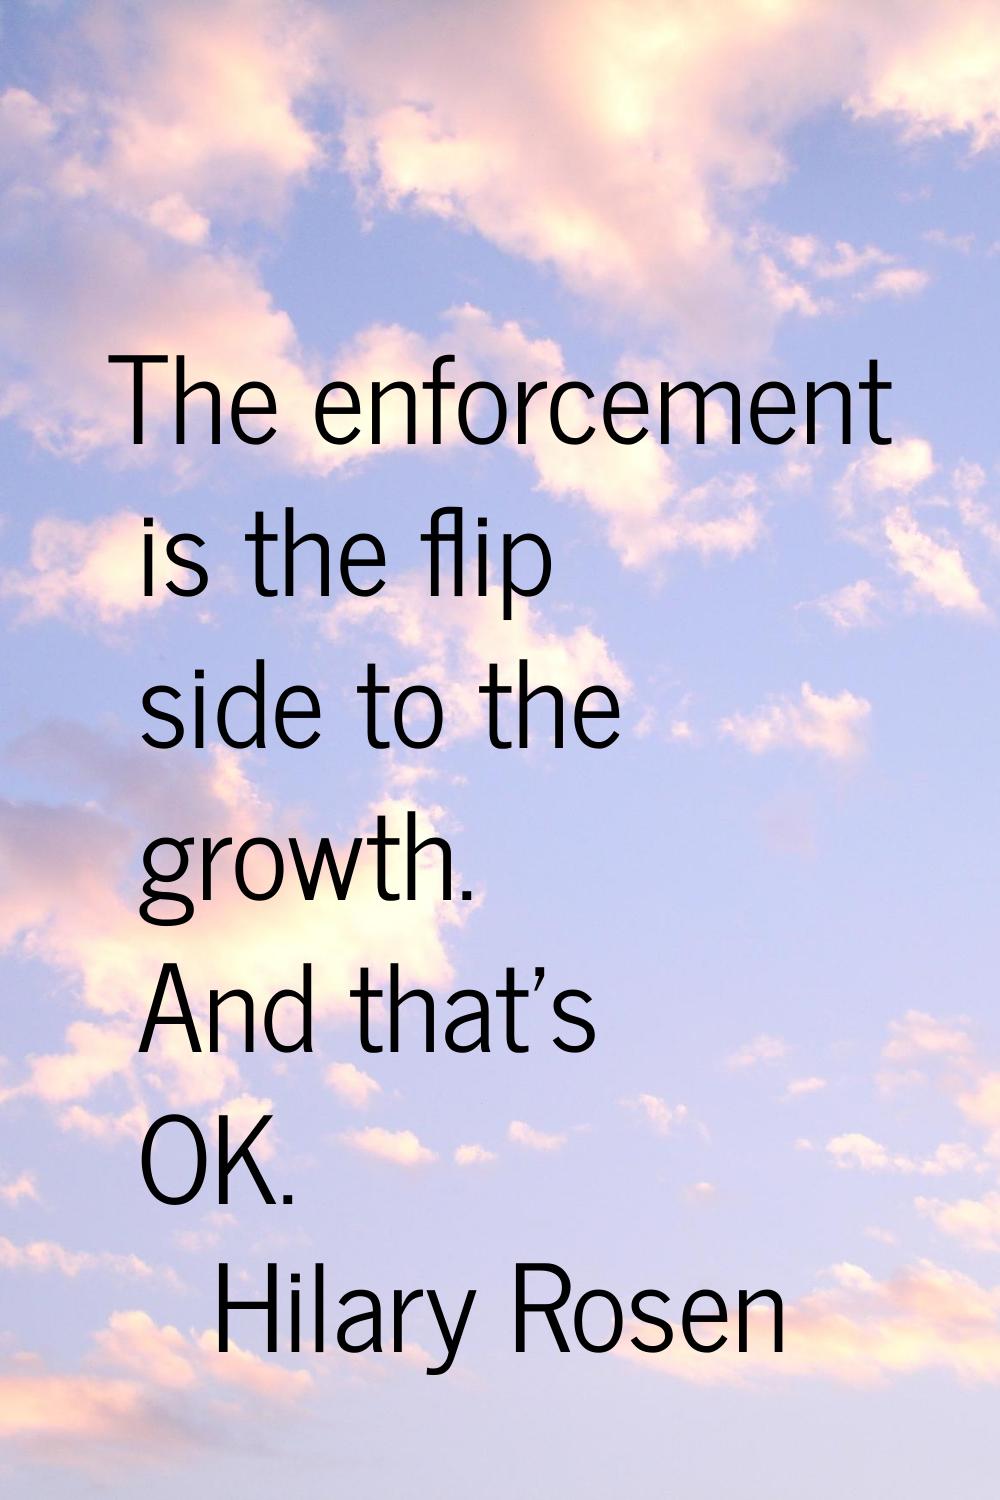 The enforcement is the flip side to the growth. And that's OK.